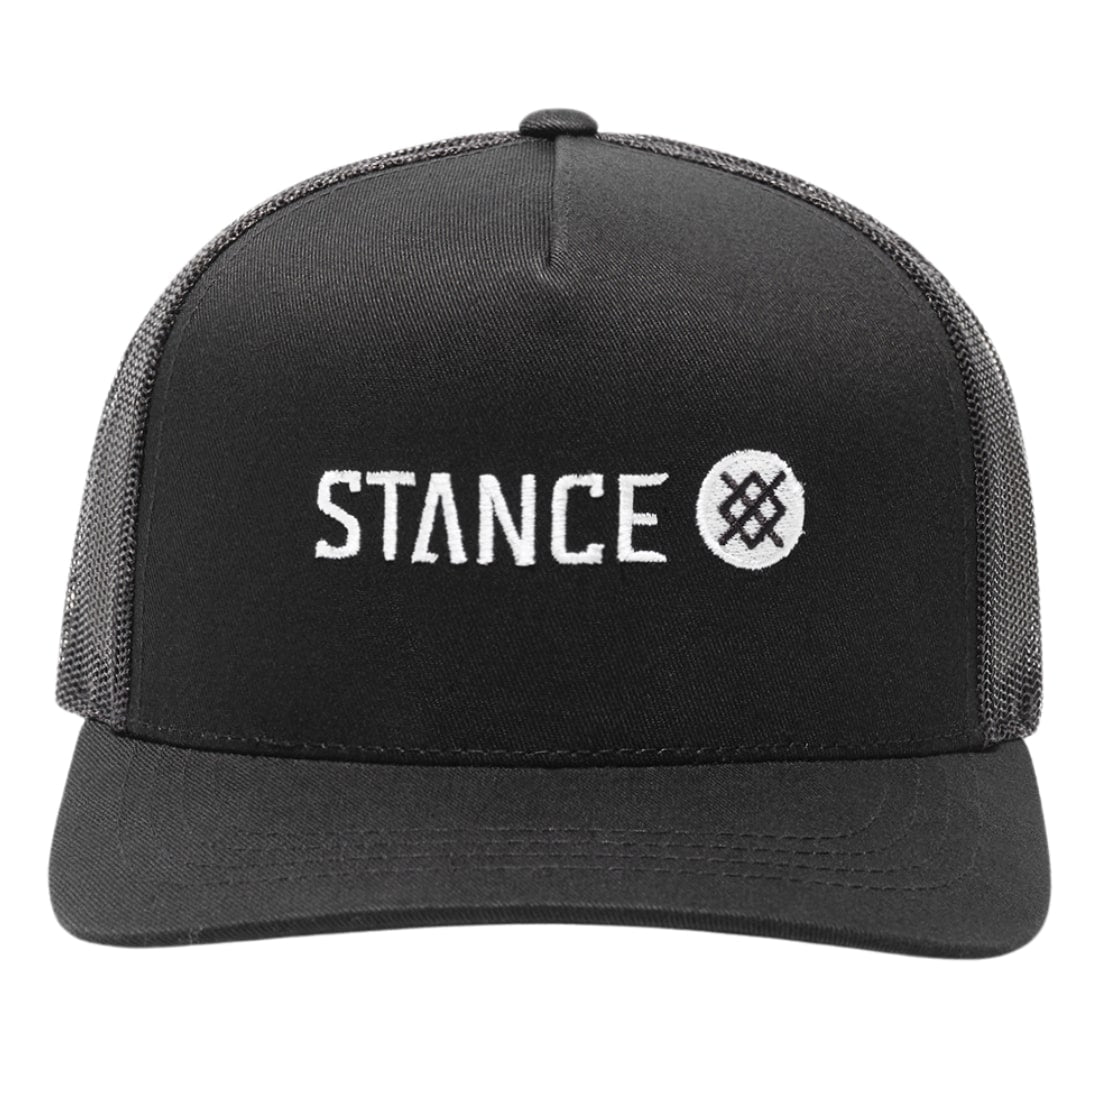 Stance Icon Trucker Cap - Black - 5 Panel Cap by Stance One Size